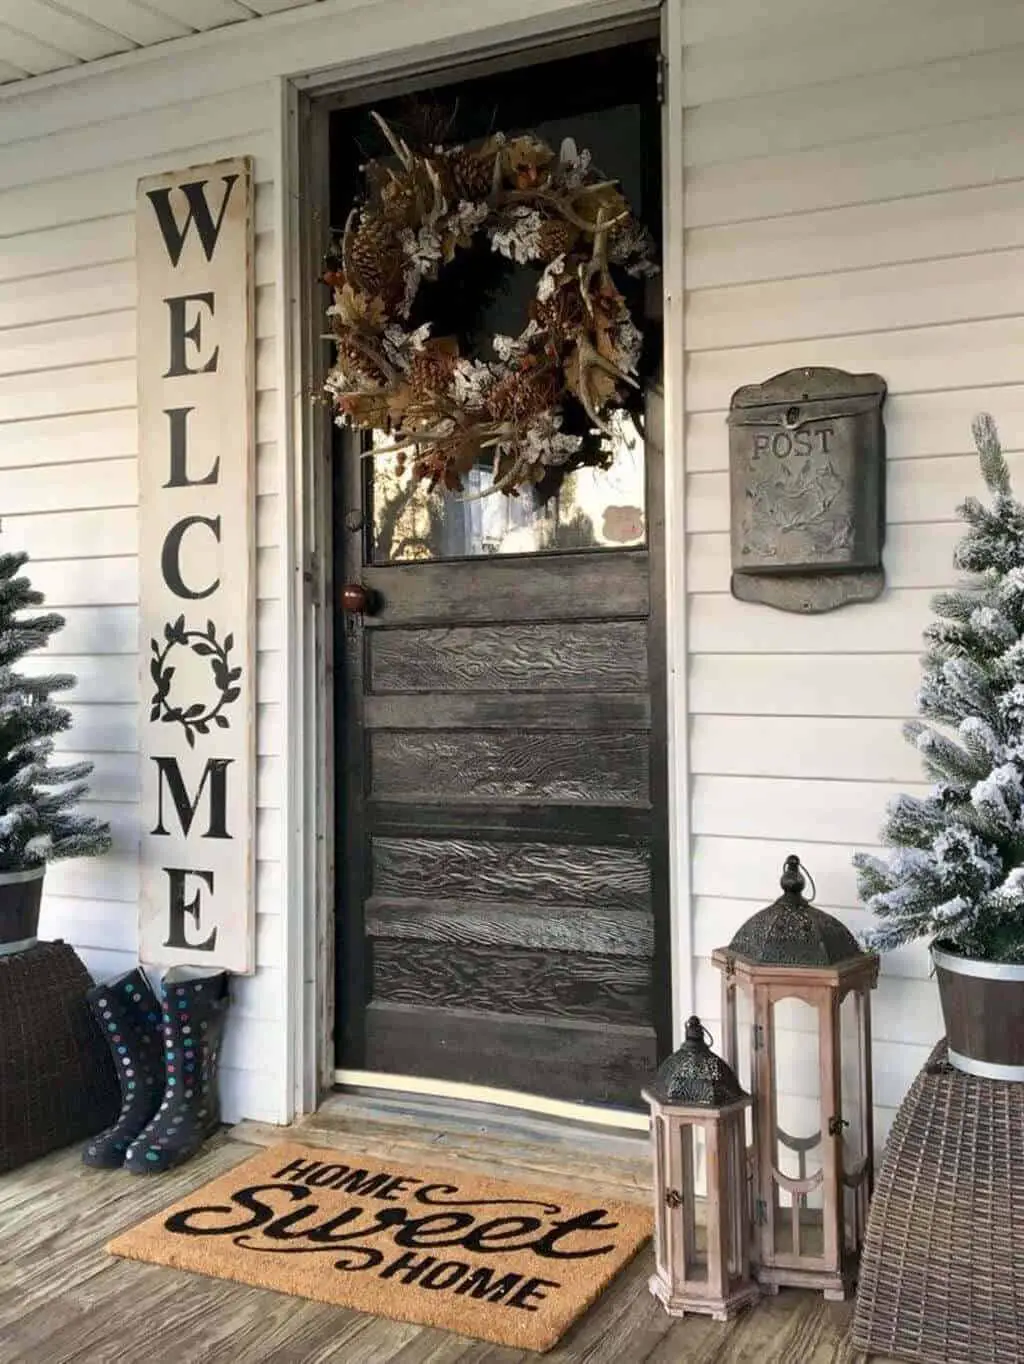 Get going and check the exterior door design ideas we found, we hope you like them! betterthathome.com for more.